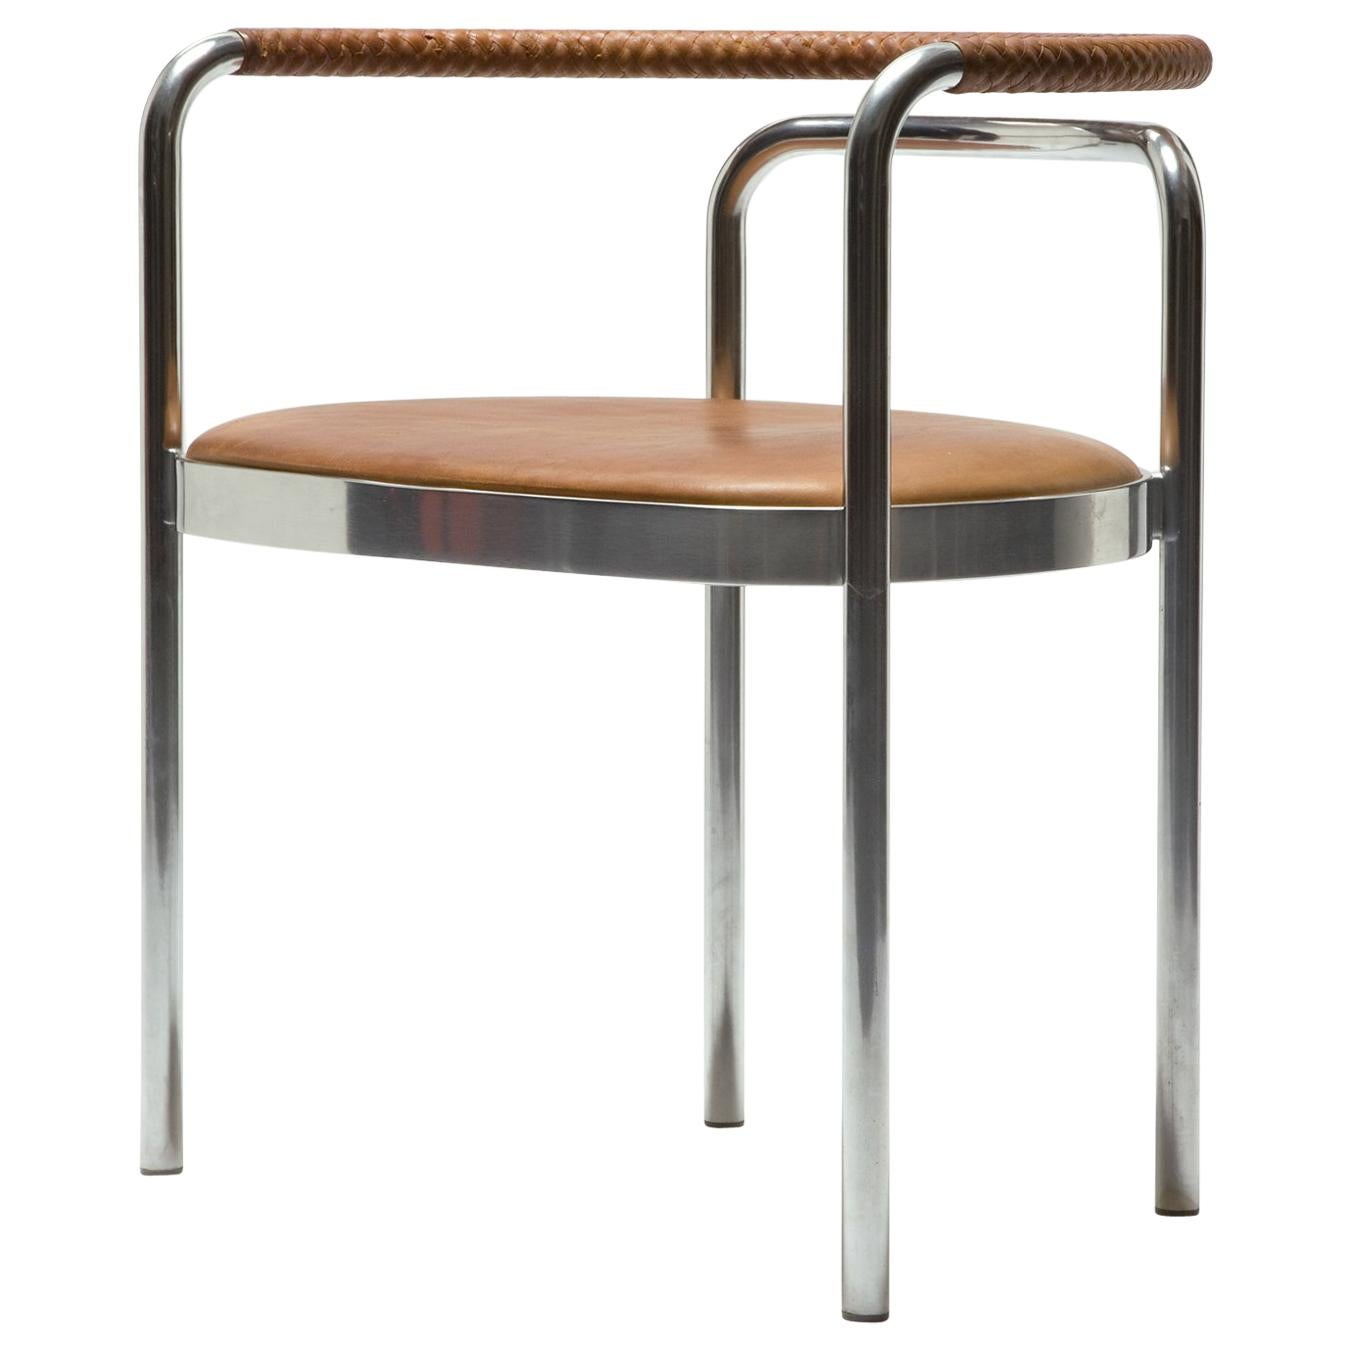 PK 12 Chair in Braided Brown Leather and Stainless Steel by Poul Kjaerholm, 1964